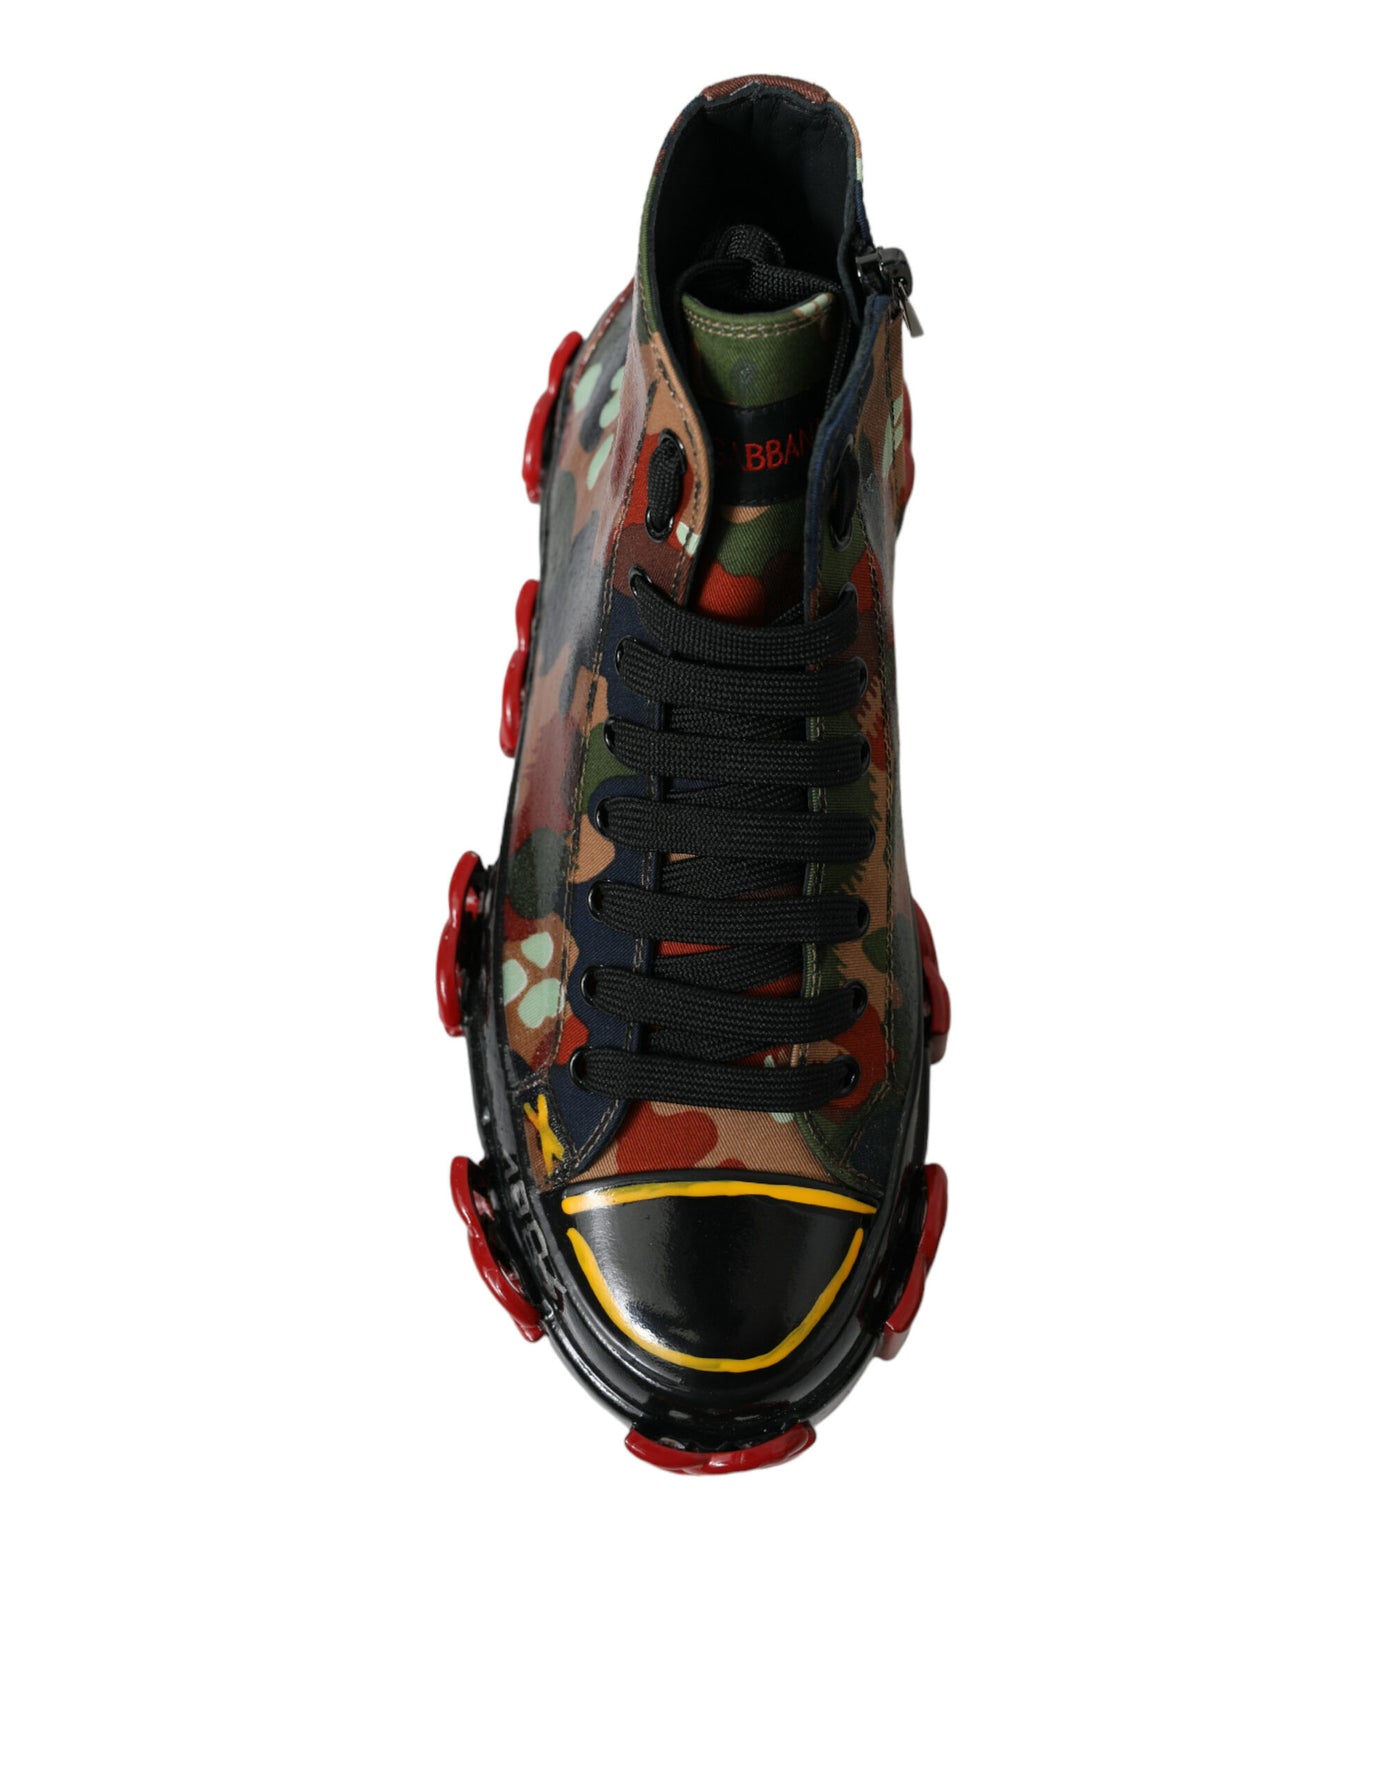 Dolce & Gabbana Multicolor Camouflage High Top Sneakers Shoes